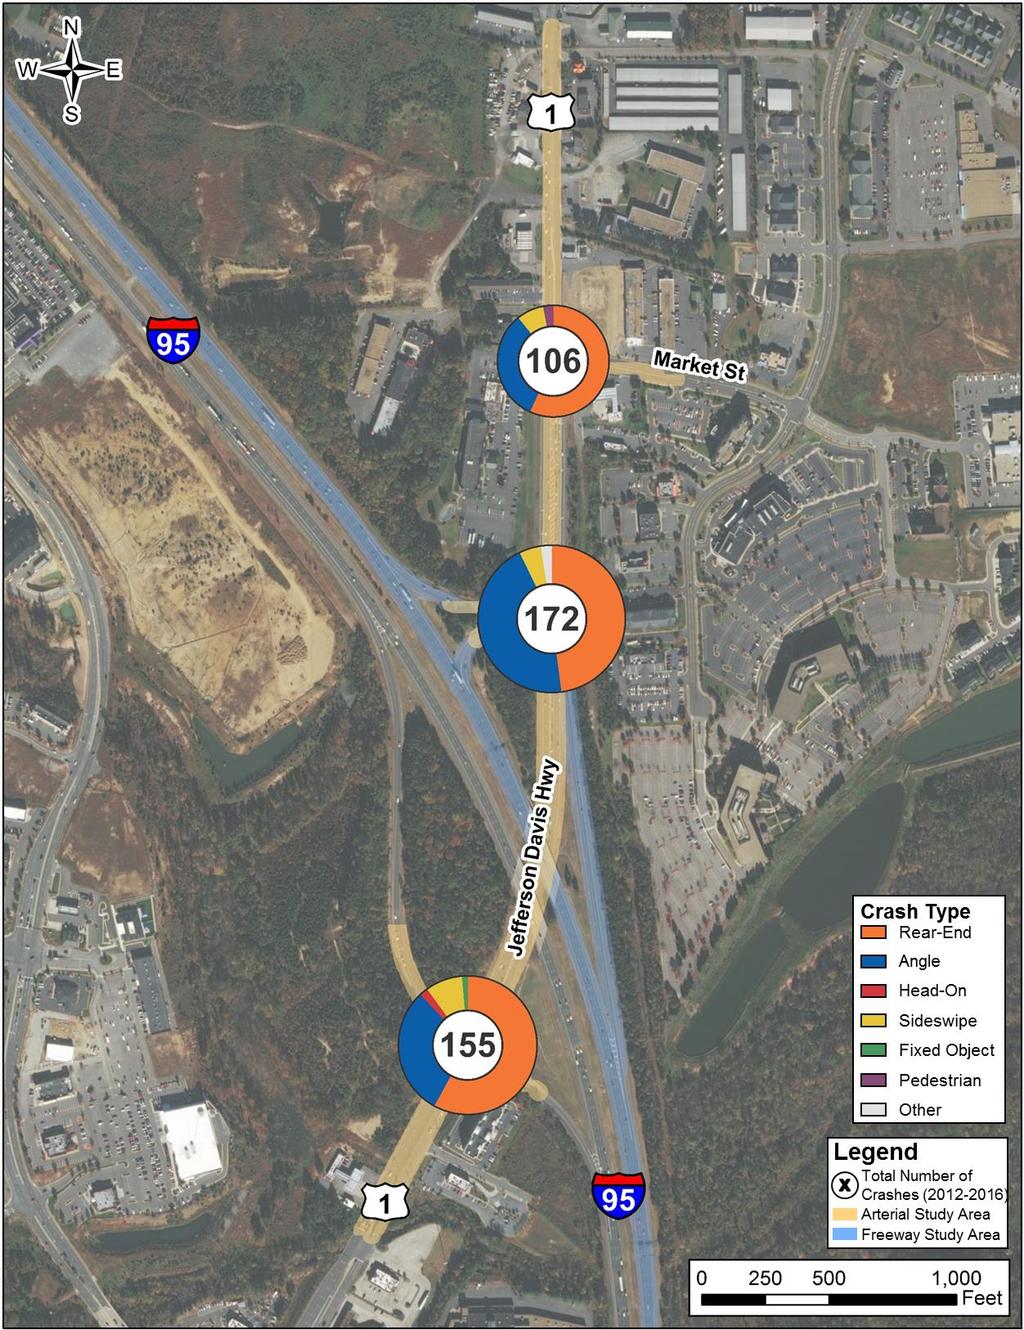 Crash activity on US 1 was analyzed by intersection and a summary of crashes for the three study intersections by collision type is included in Figure 5.